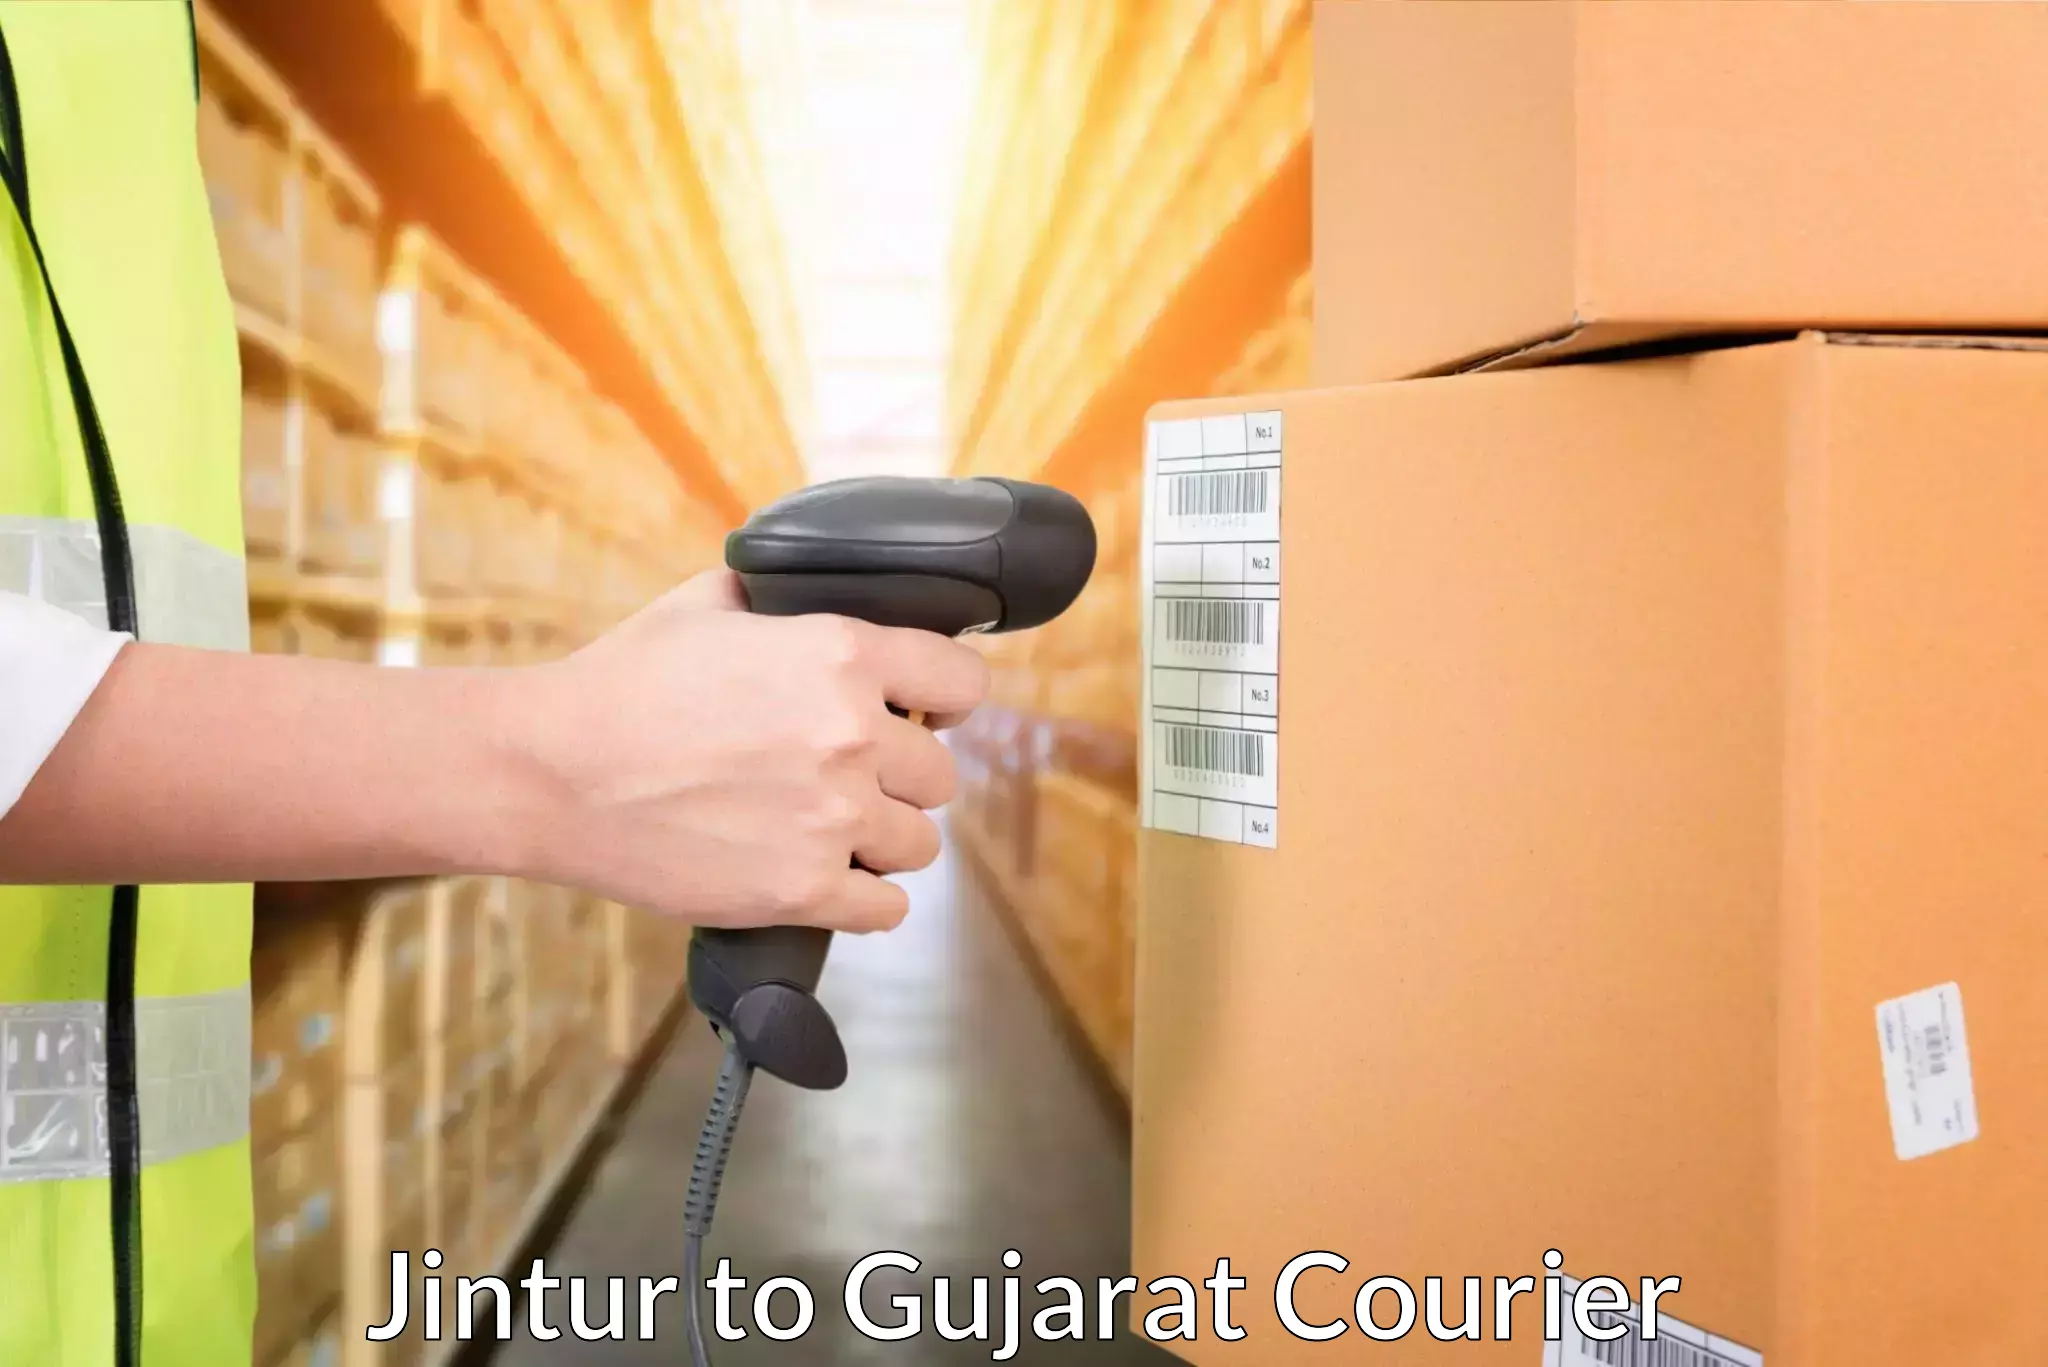 Rapid shipping services Jintur to Mundra